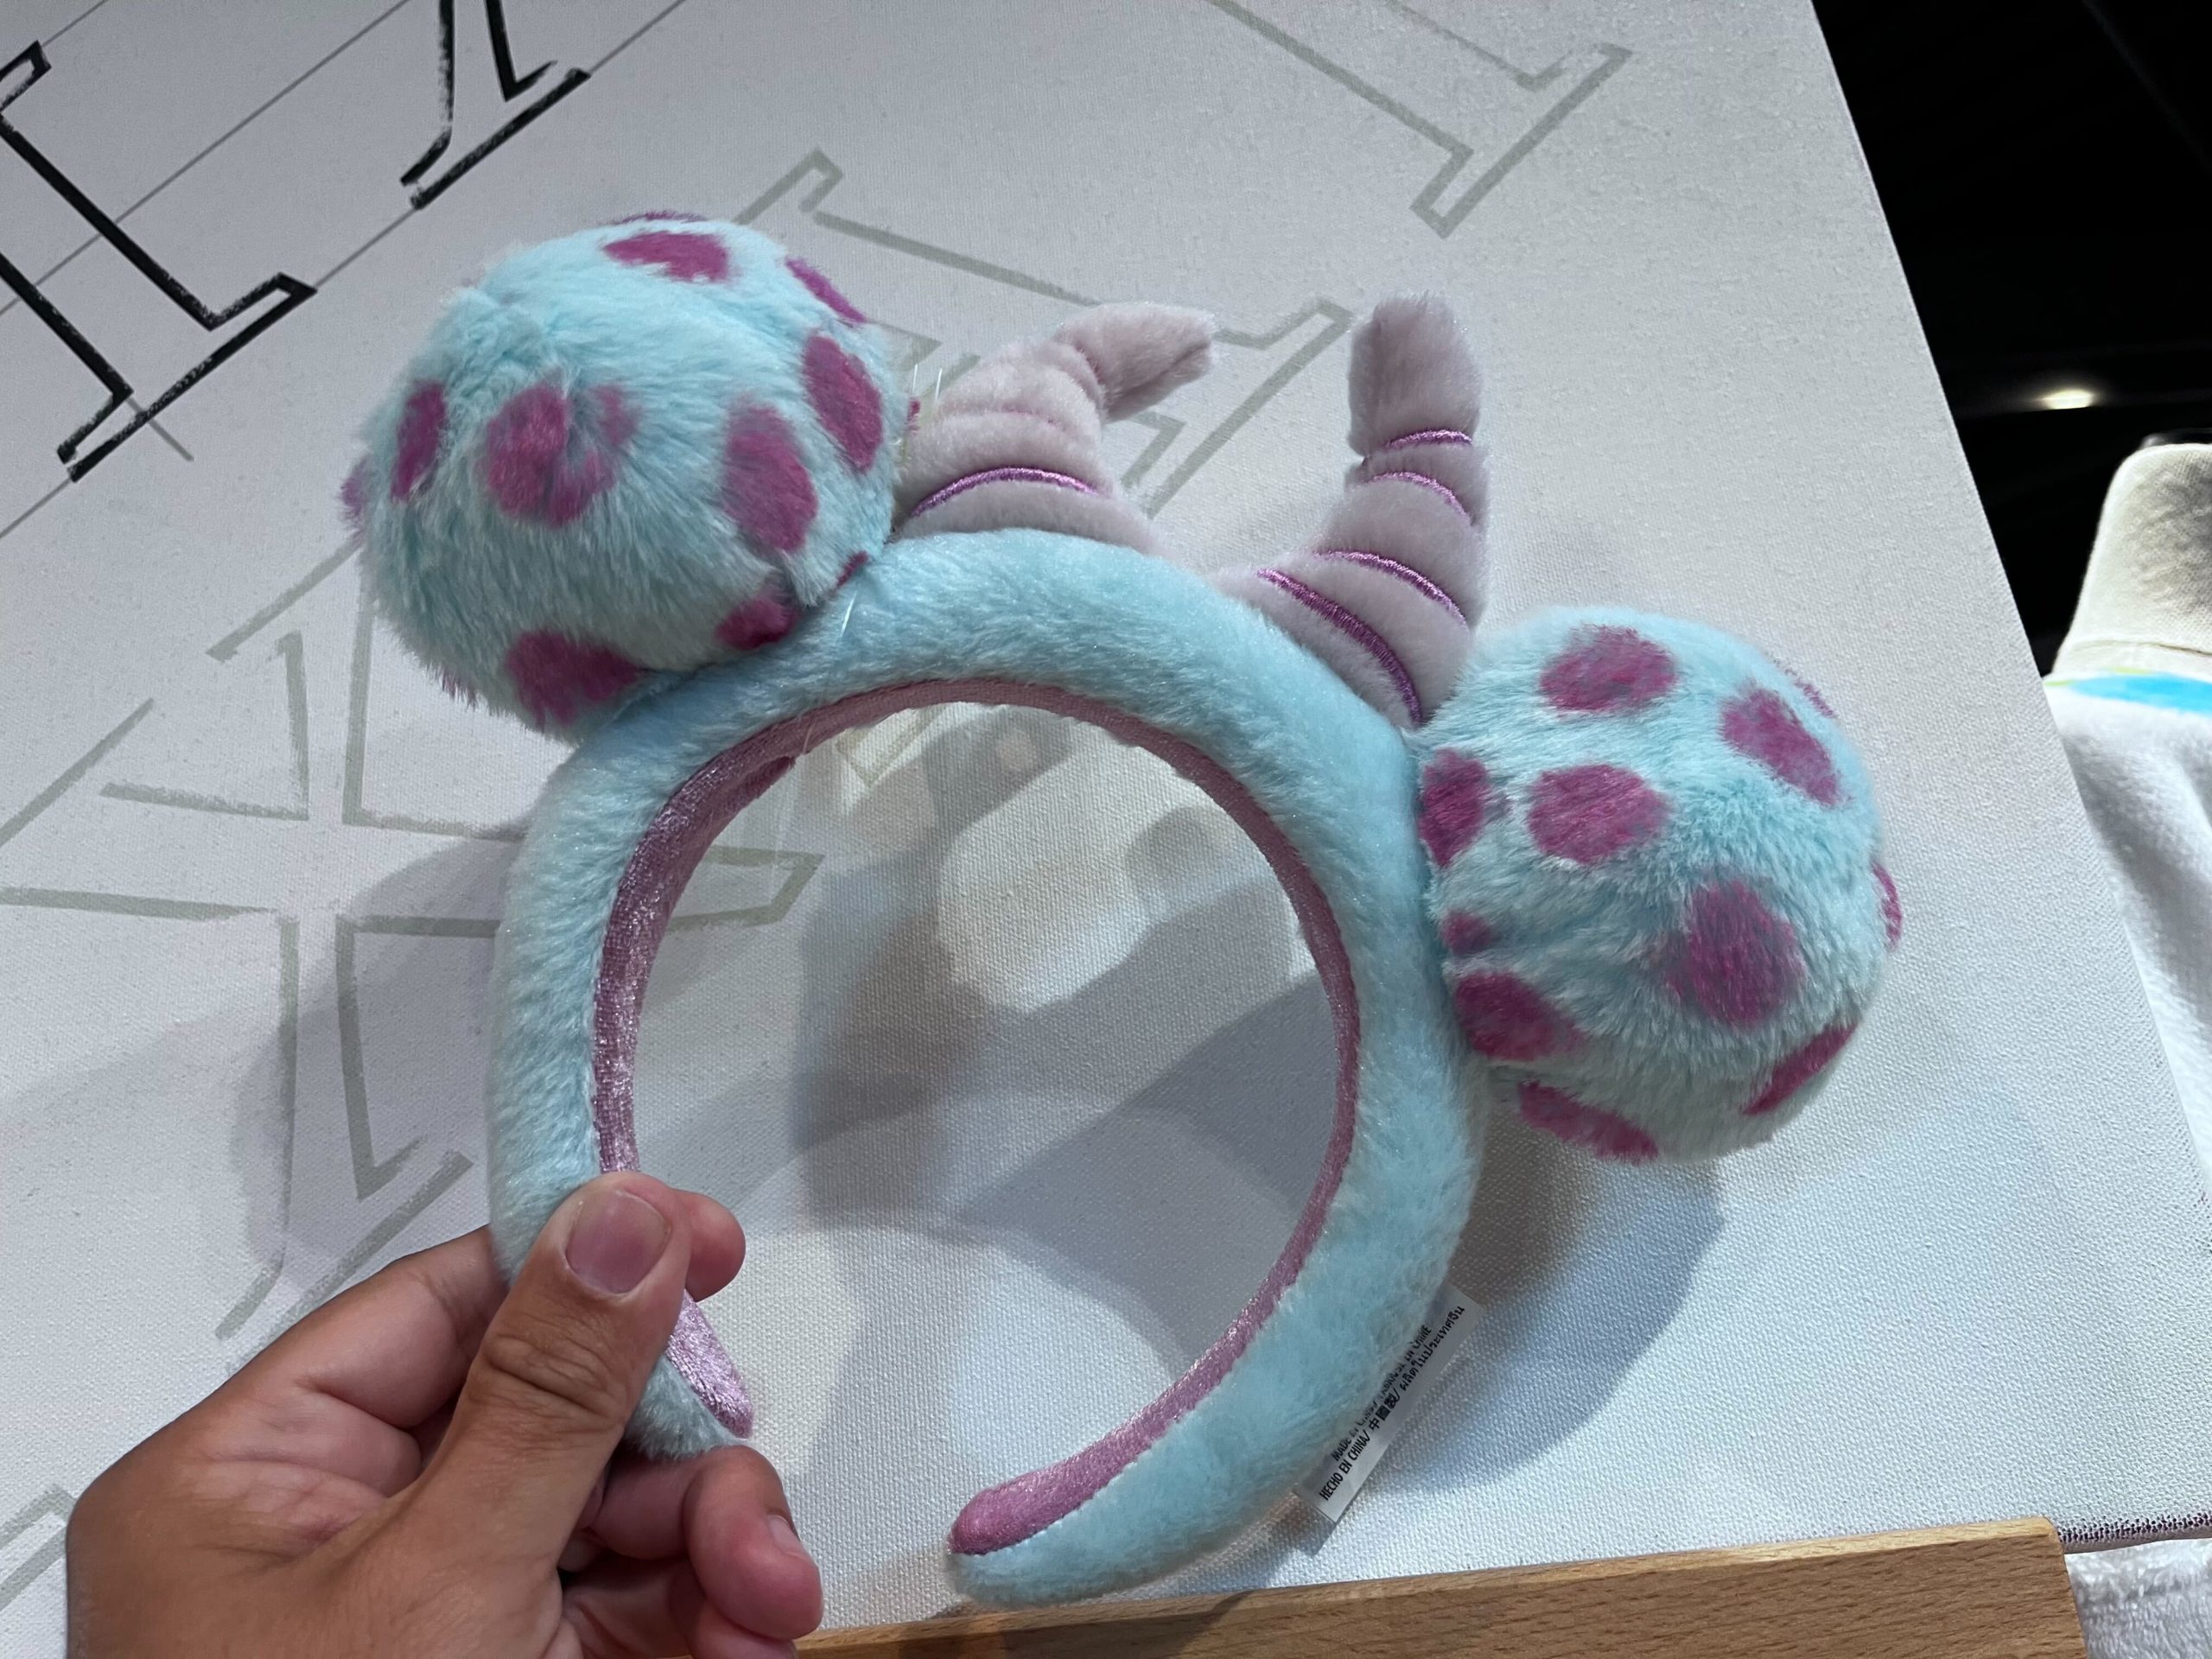 NEW Sulley Monsters Inc. Ears Now at World of Disney in Disney Springs